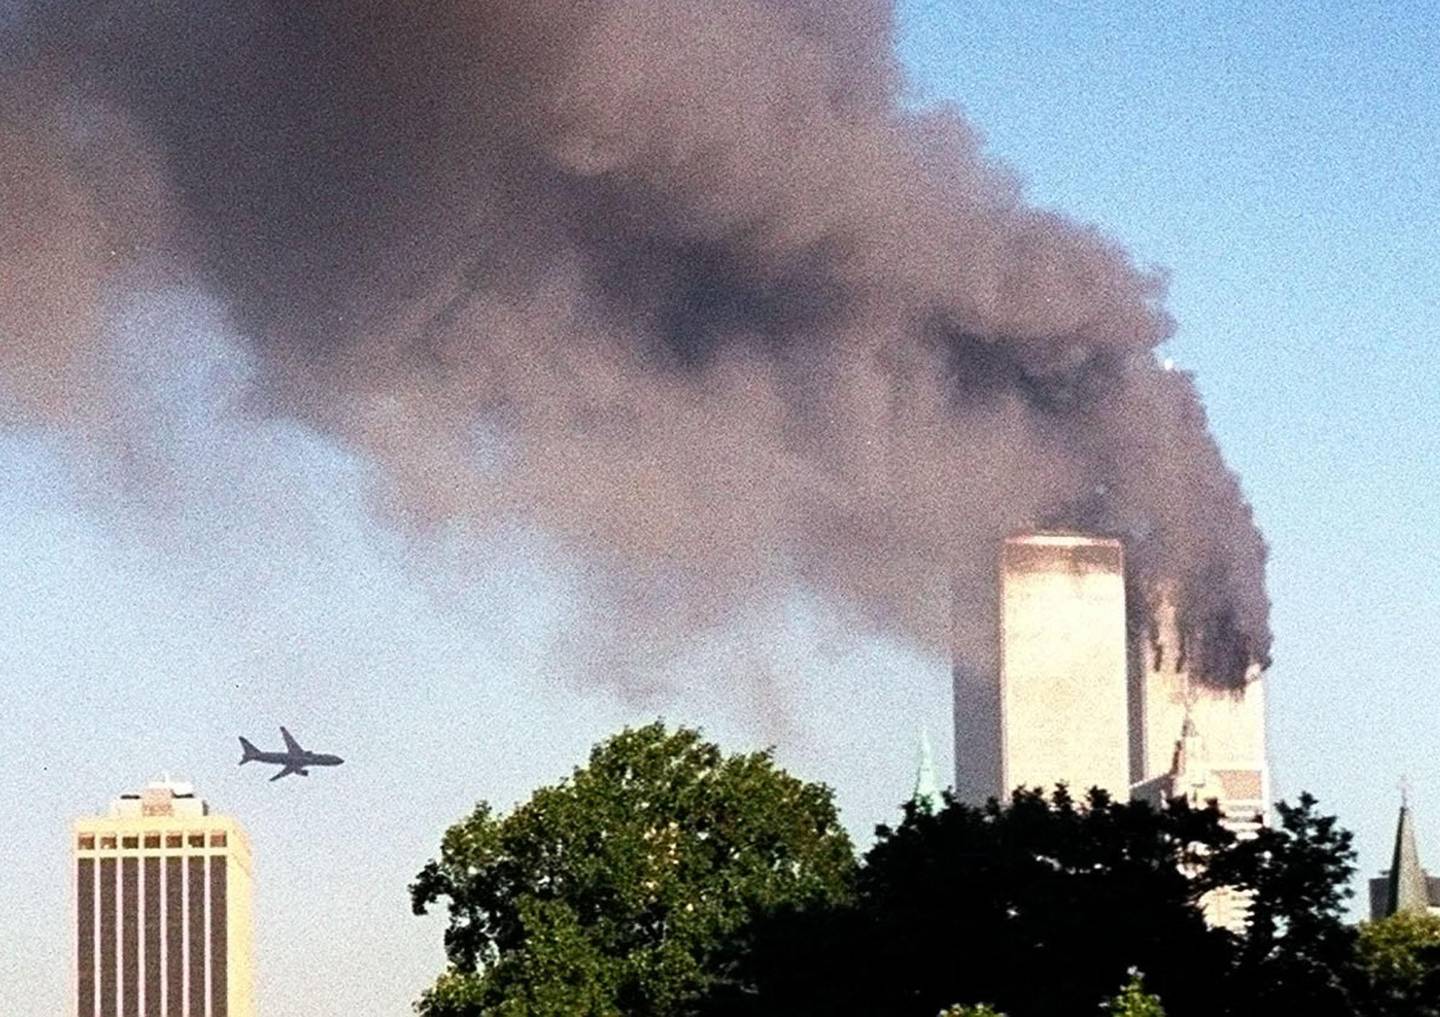 FILE- In this Sept. 11, 2001 file photo, American Airlines Flight 175 closes in on World Trade Center Tower 2 in New York, just before impact.  On Monday, July 15, 2013, a lawsuit commences in New York City that will decide whether the owners of the World Trade Center can try to make several airlines and other aviation defendants pay billions of dollars in damages for their liability in the attacks. (AP Photo/William Kratzke)